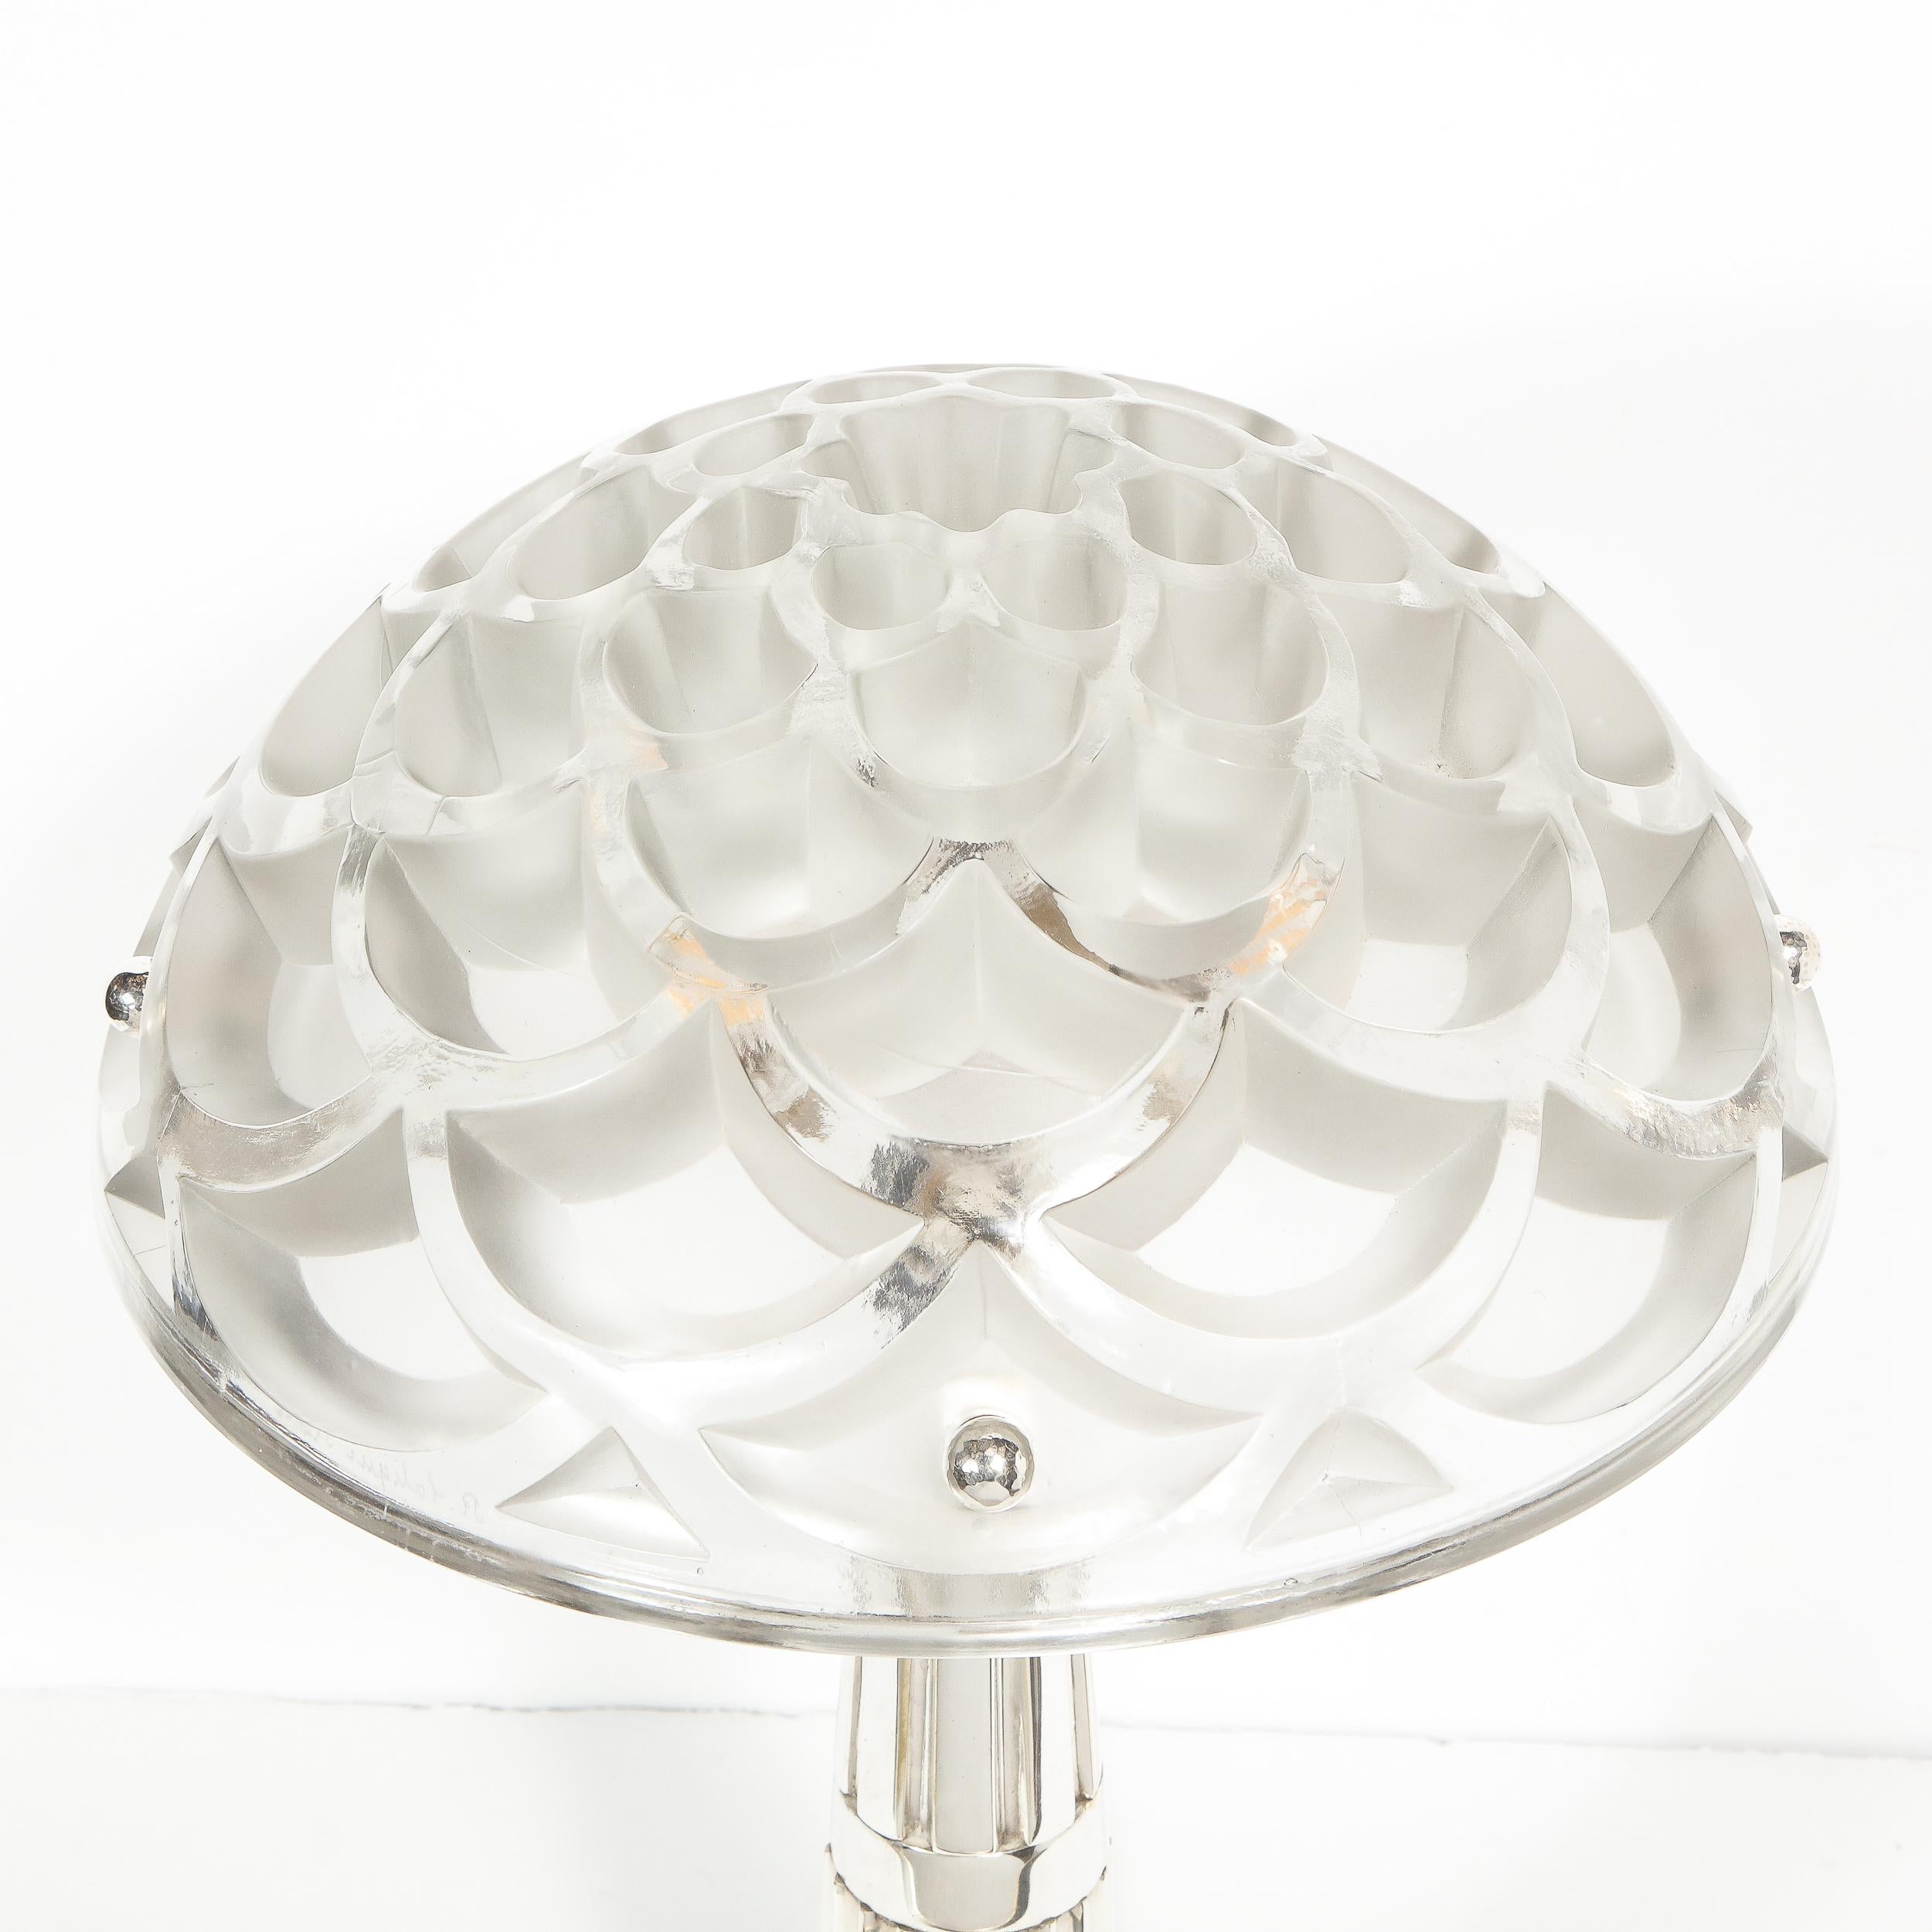 20th Century Art Deco Style Silvered Bronze Table Lamp with Rinceaux Shade Signed by Lalique